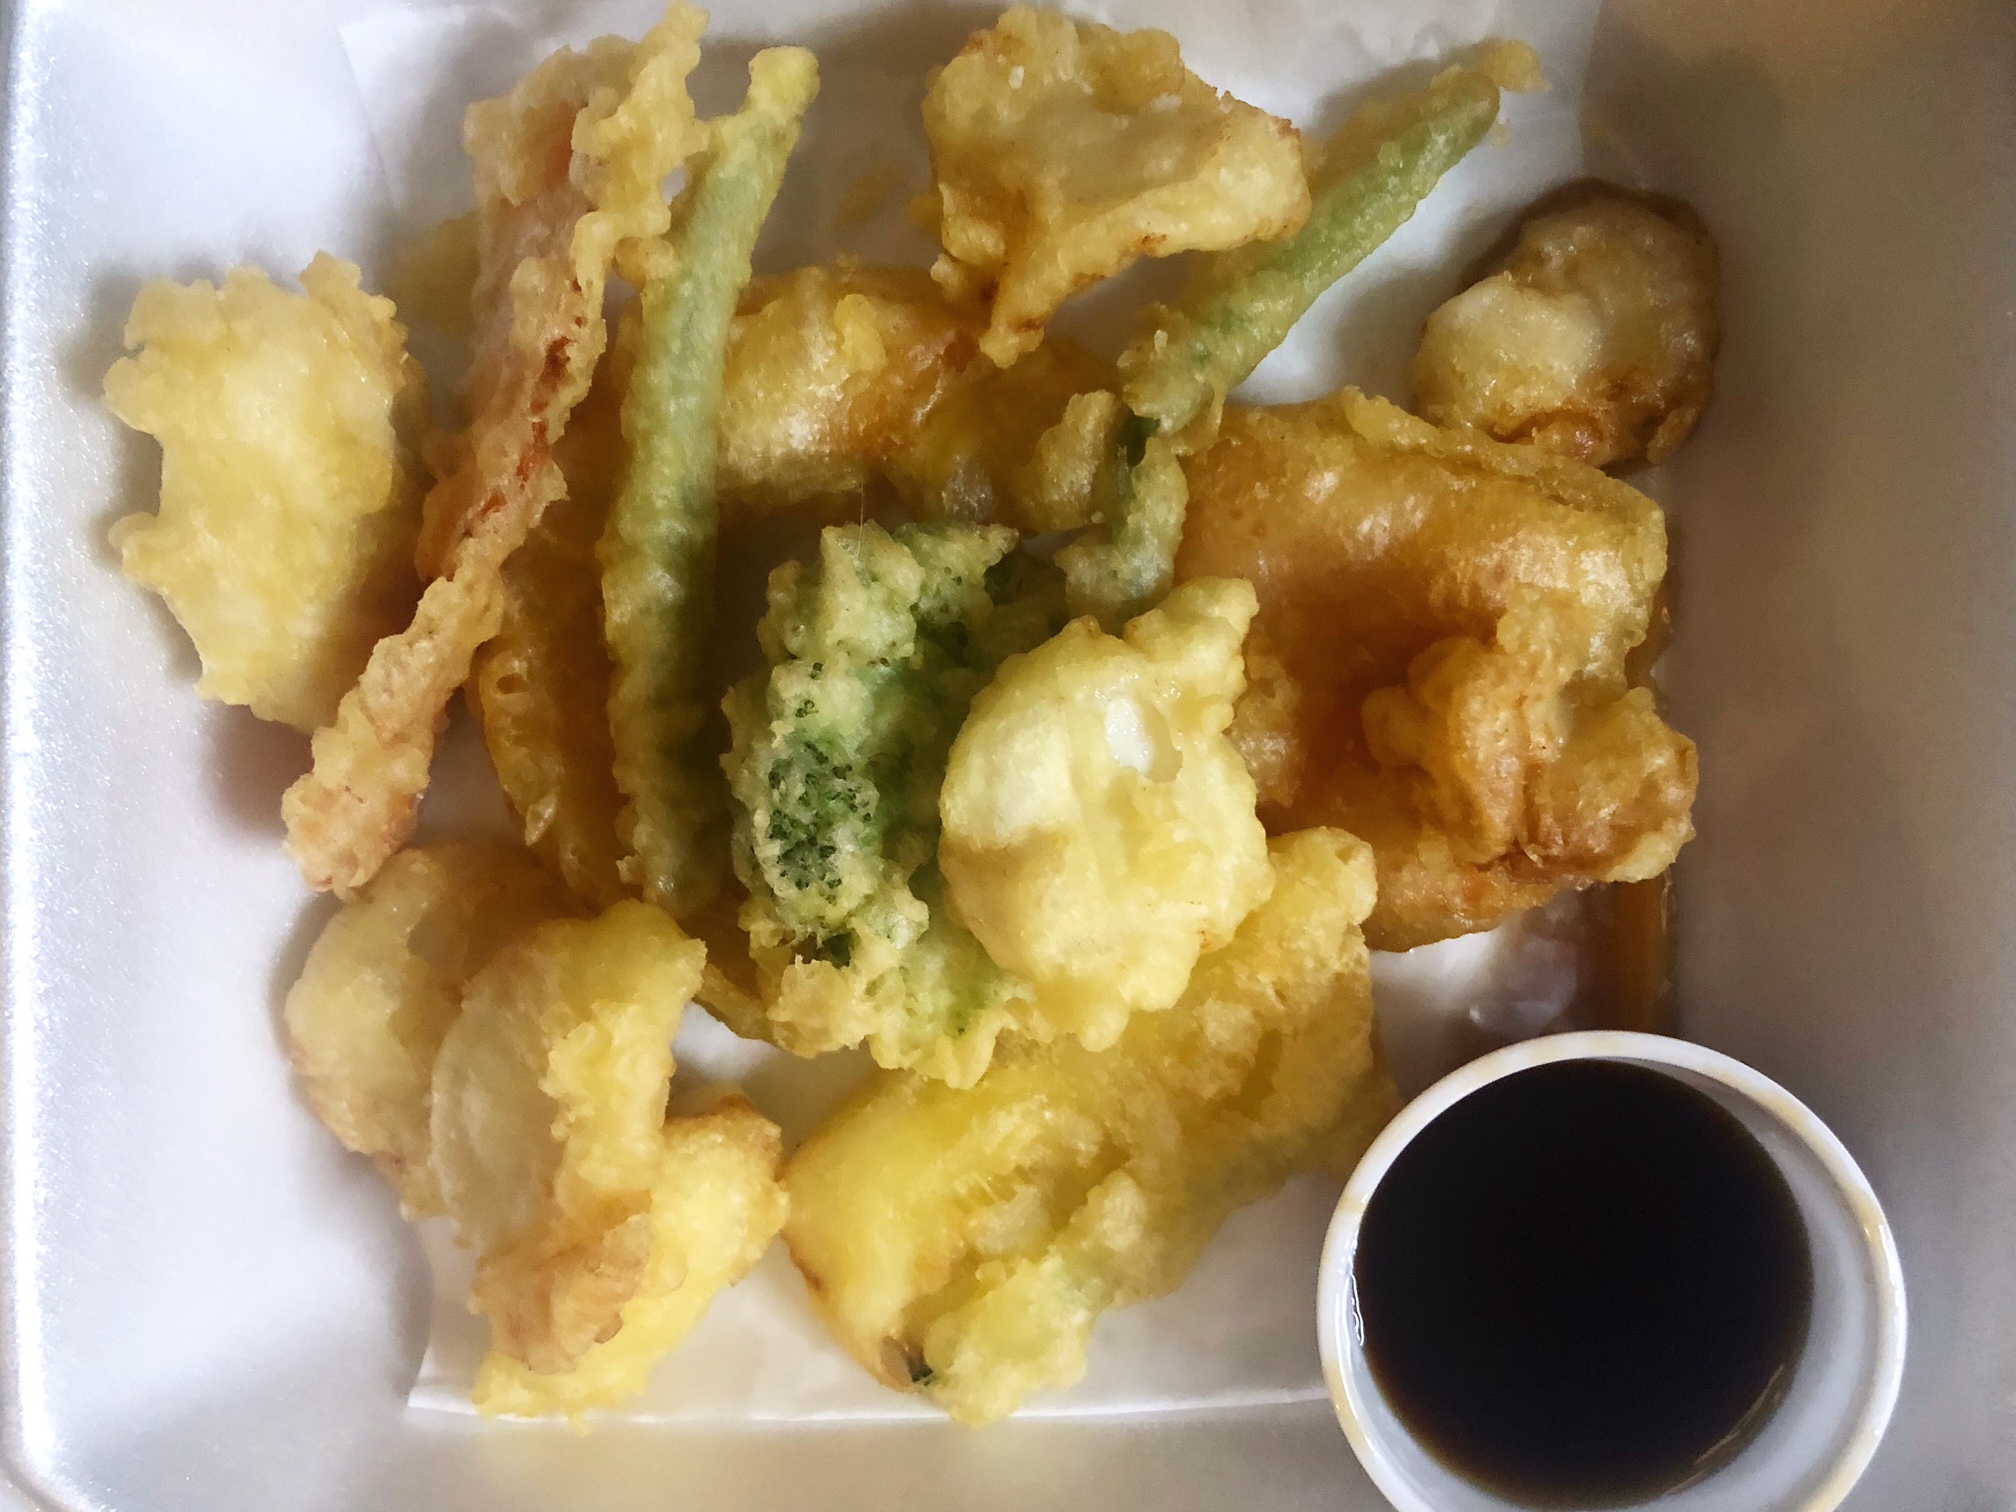 In a white styrofoam container, there are tempura scallops and tempura veggies plus a small cup of dipping sauce. Photo by Alyssa Buckley.